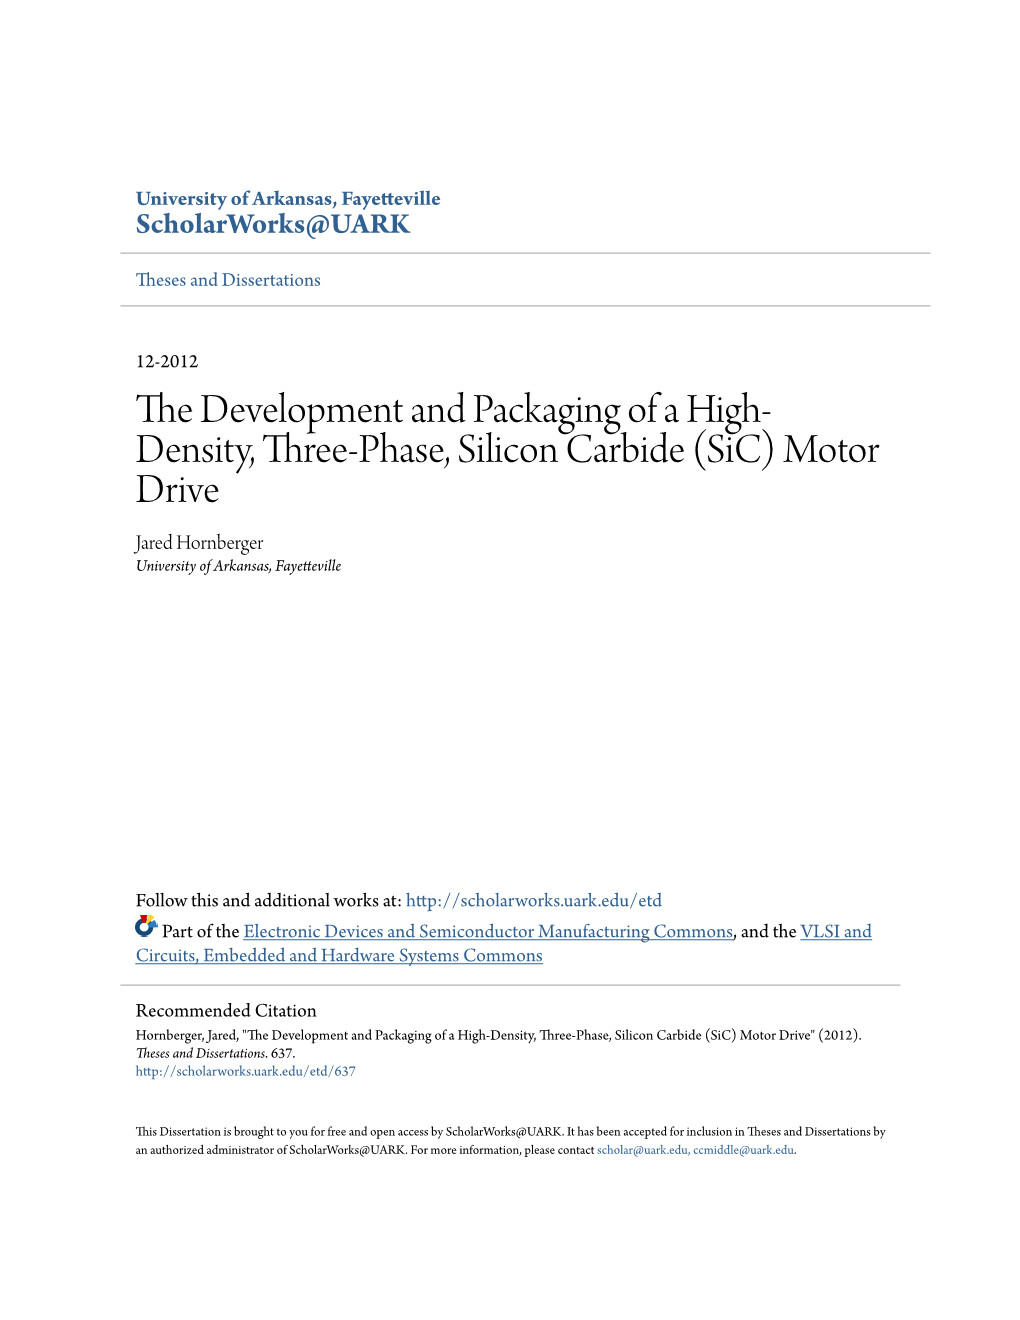 The Development and Packaging of a High-Density, Three-Phase, Silicon